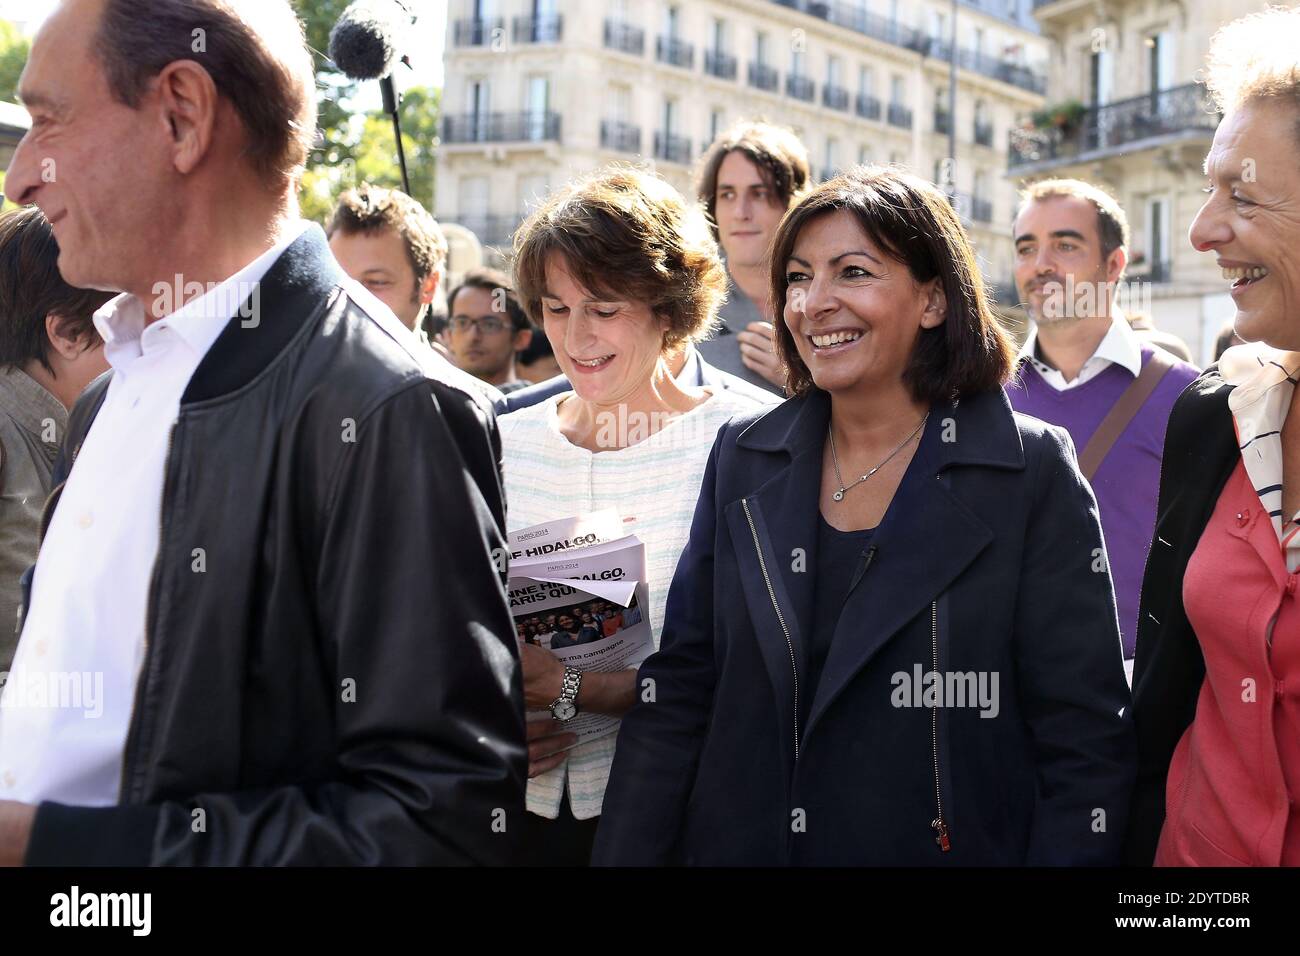 French Mayor of Paris, Bertrand Delanoe, Socialist candidate for the municipal election in Paris, Anne Hidalgo, Paris 5th district socialist candidate Marie-Christine Lemardeley and Paris socialist representative Lyne Cohen-Solal visit a market during her 2014 campaign in the 5th district of Paris, France, on september 07 2013. Photo by Stephane Lemouton/ABACAPRESS.COM Stock Photo